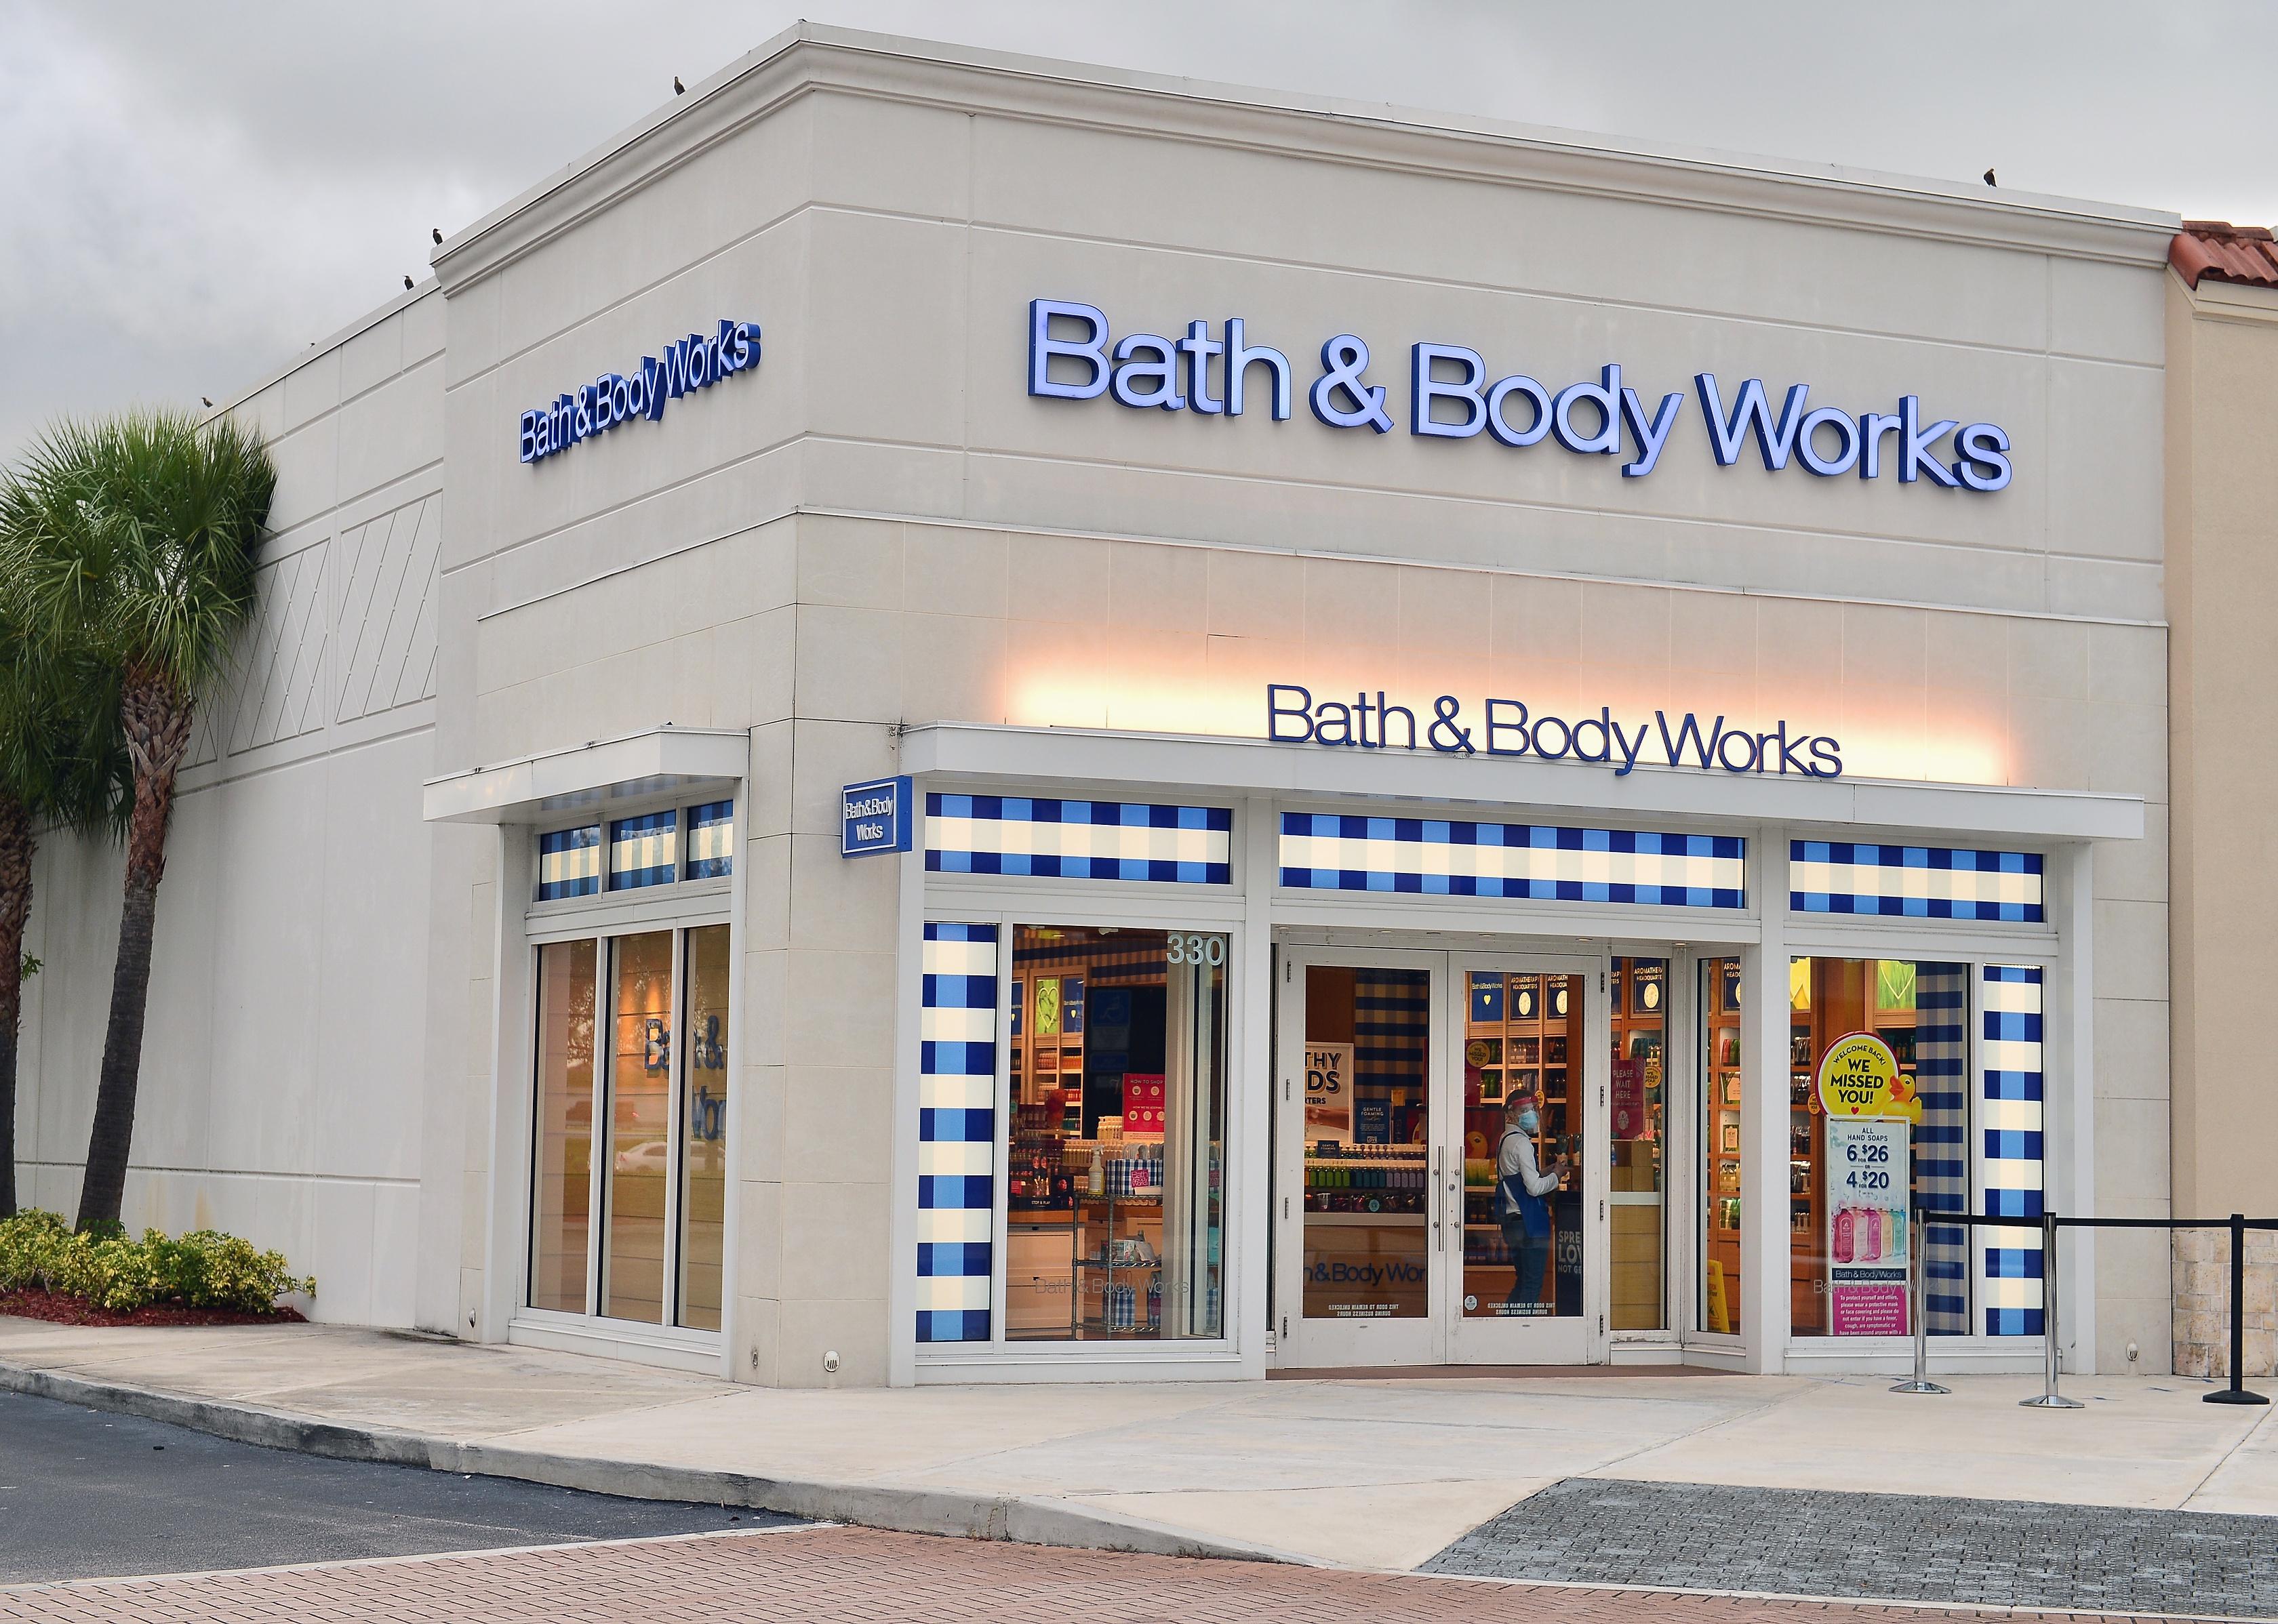 The exterior of a Bath & Body Works store with blue signage.